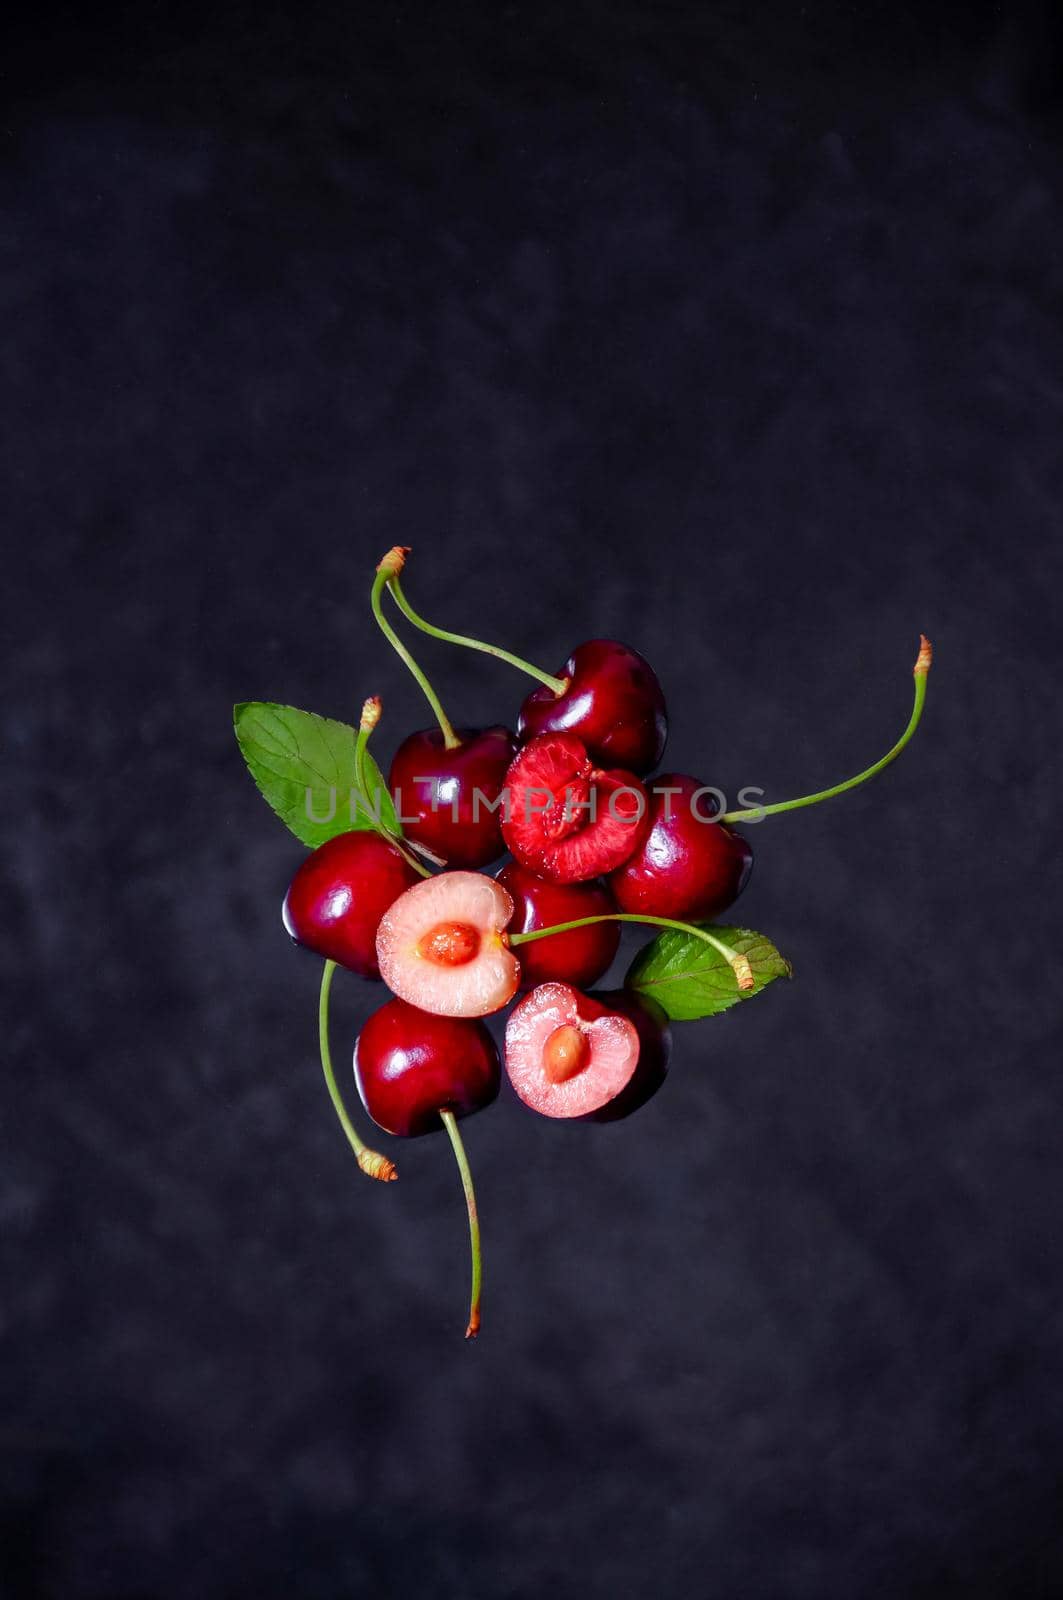 Close up Composition of Cherries Flying in the air on Dark Background by Svetlana_Belozerova